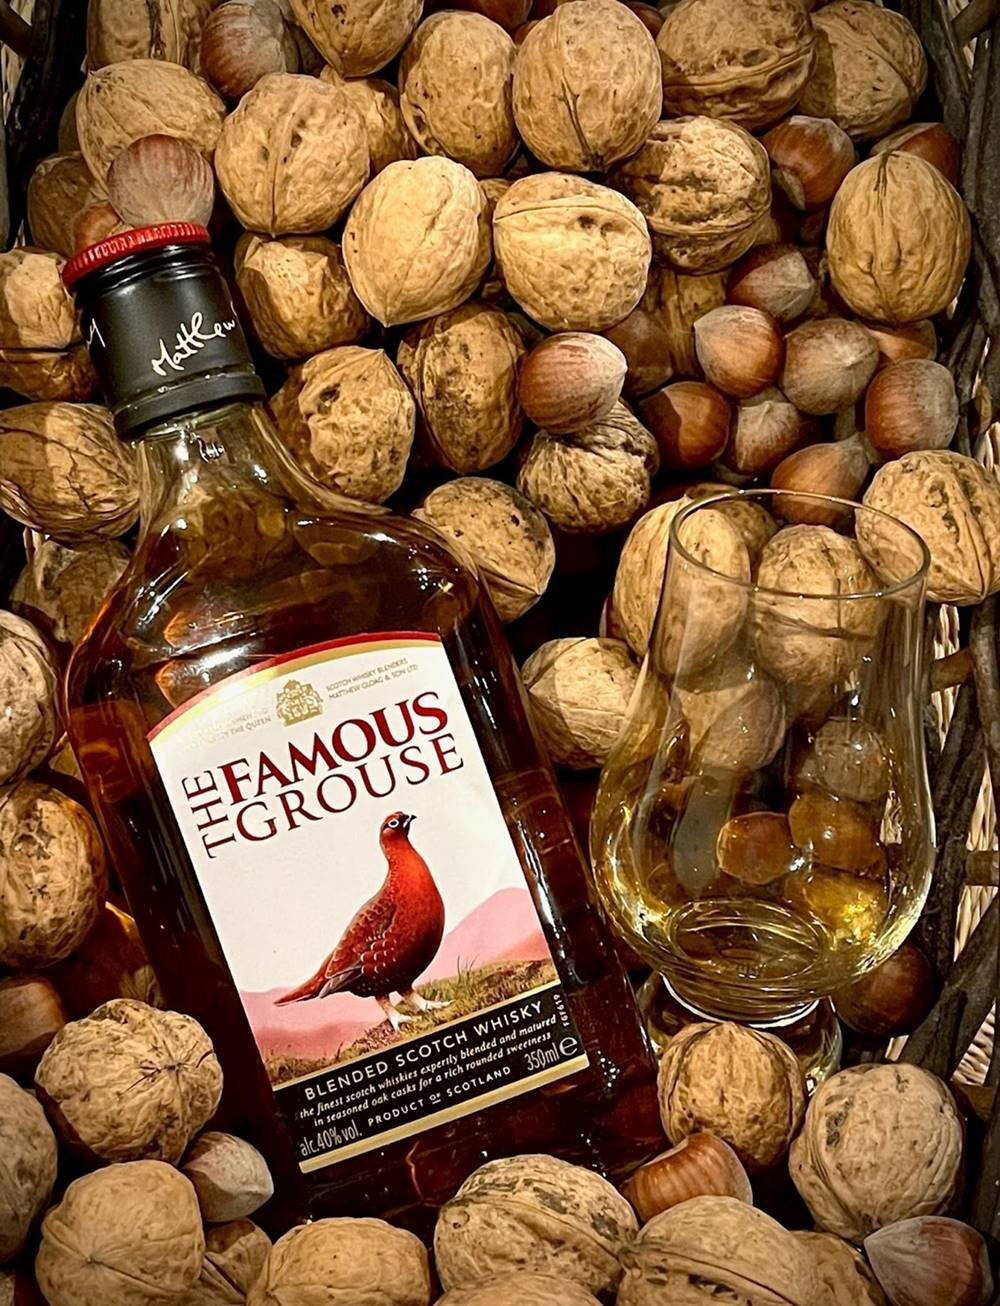 Famousgrouse Blended Scotch Wallnuts (famous Grouse Blended Scotch Walnüsse) Wallpaper